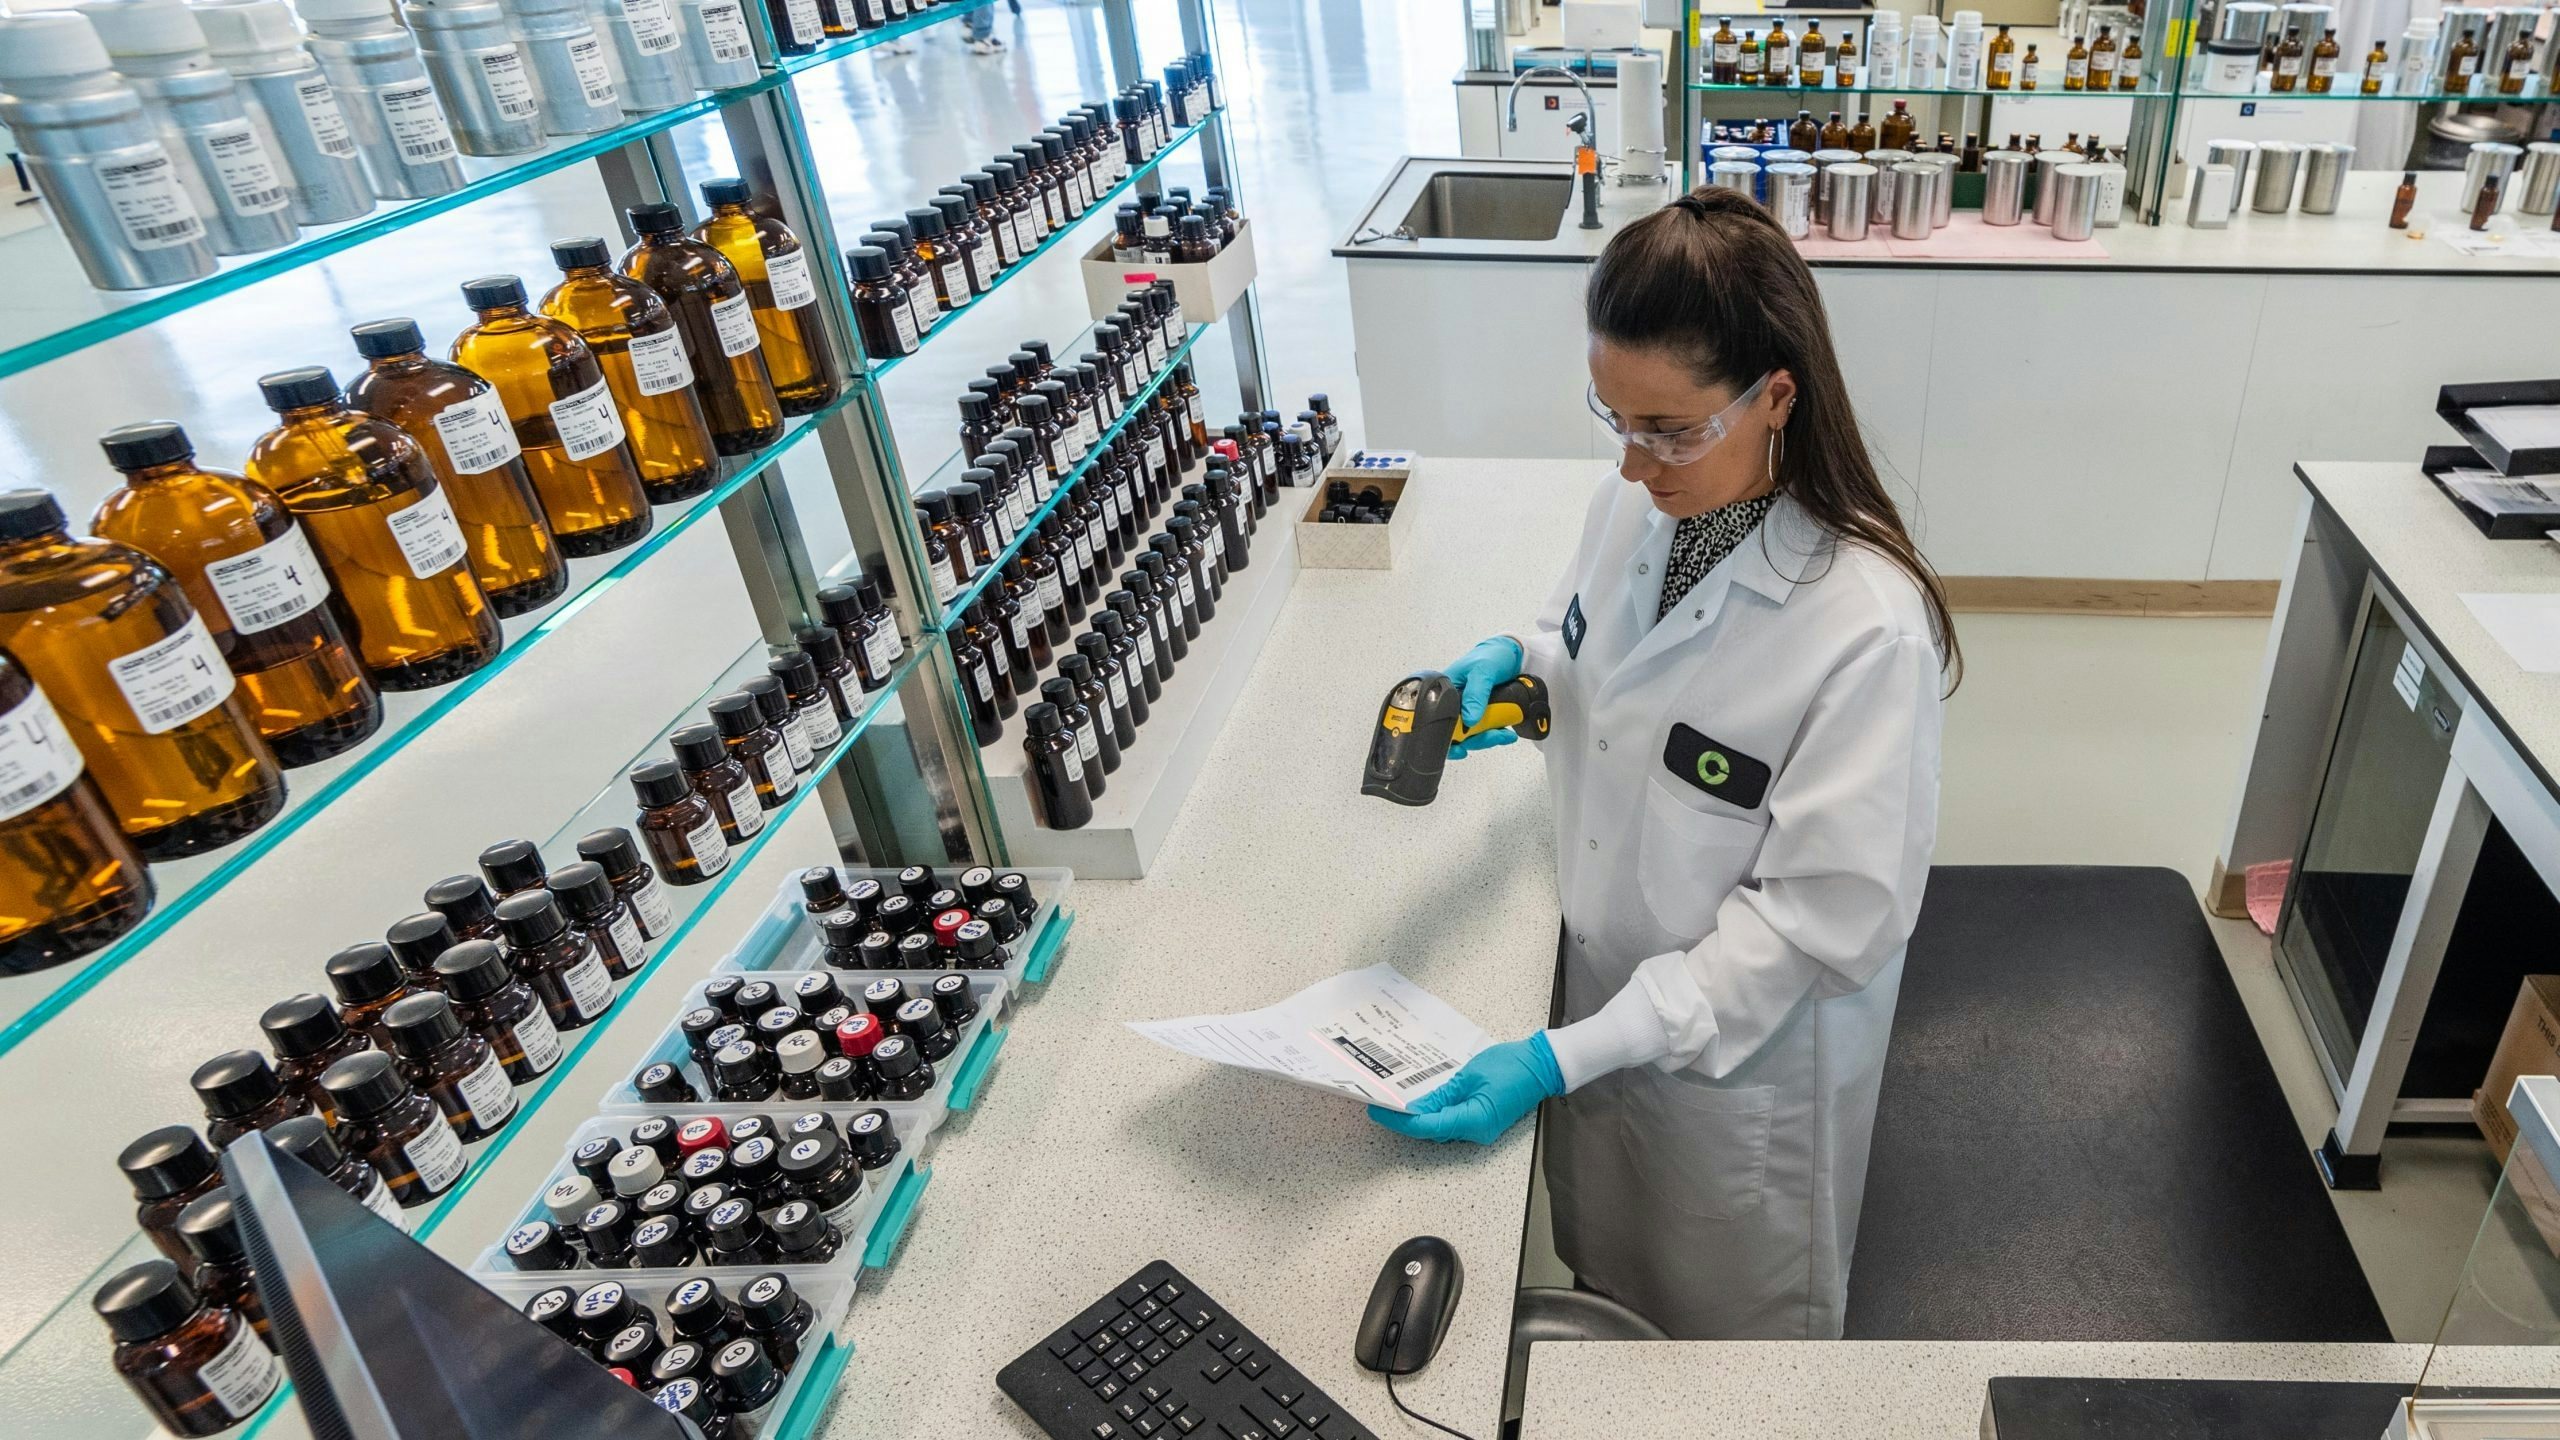 Jing Daily caught up with Maurizio Volpi and Yaling Li of the fragrance company Givaudan to see how they are adapting to China’s perfume market. Photo: Courtesy of Givaudan